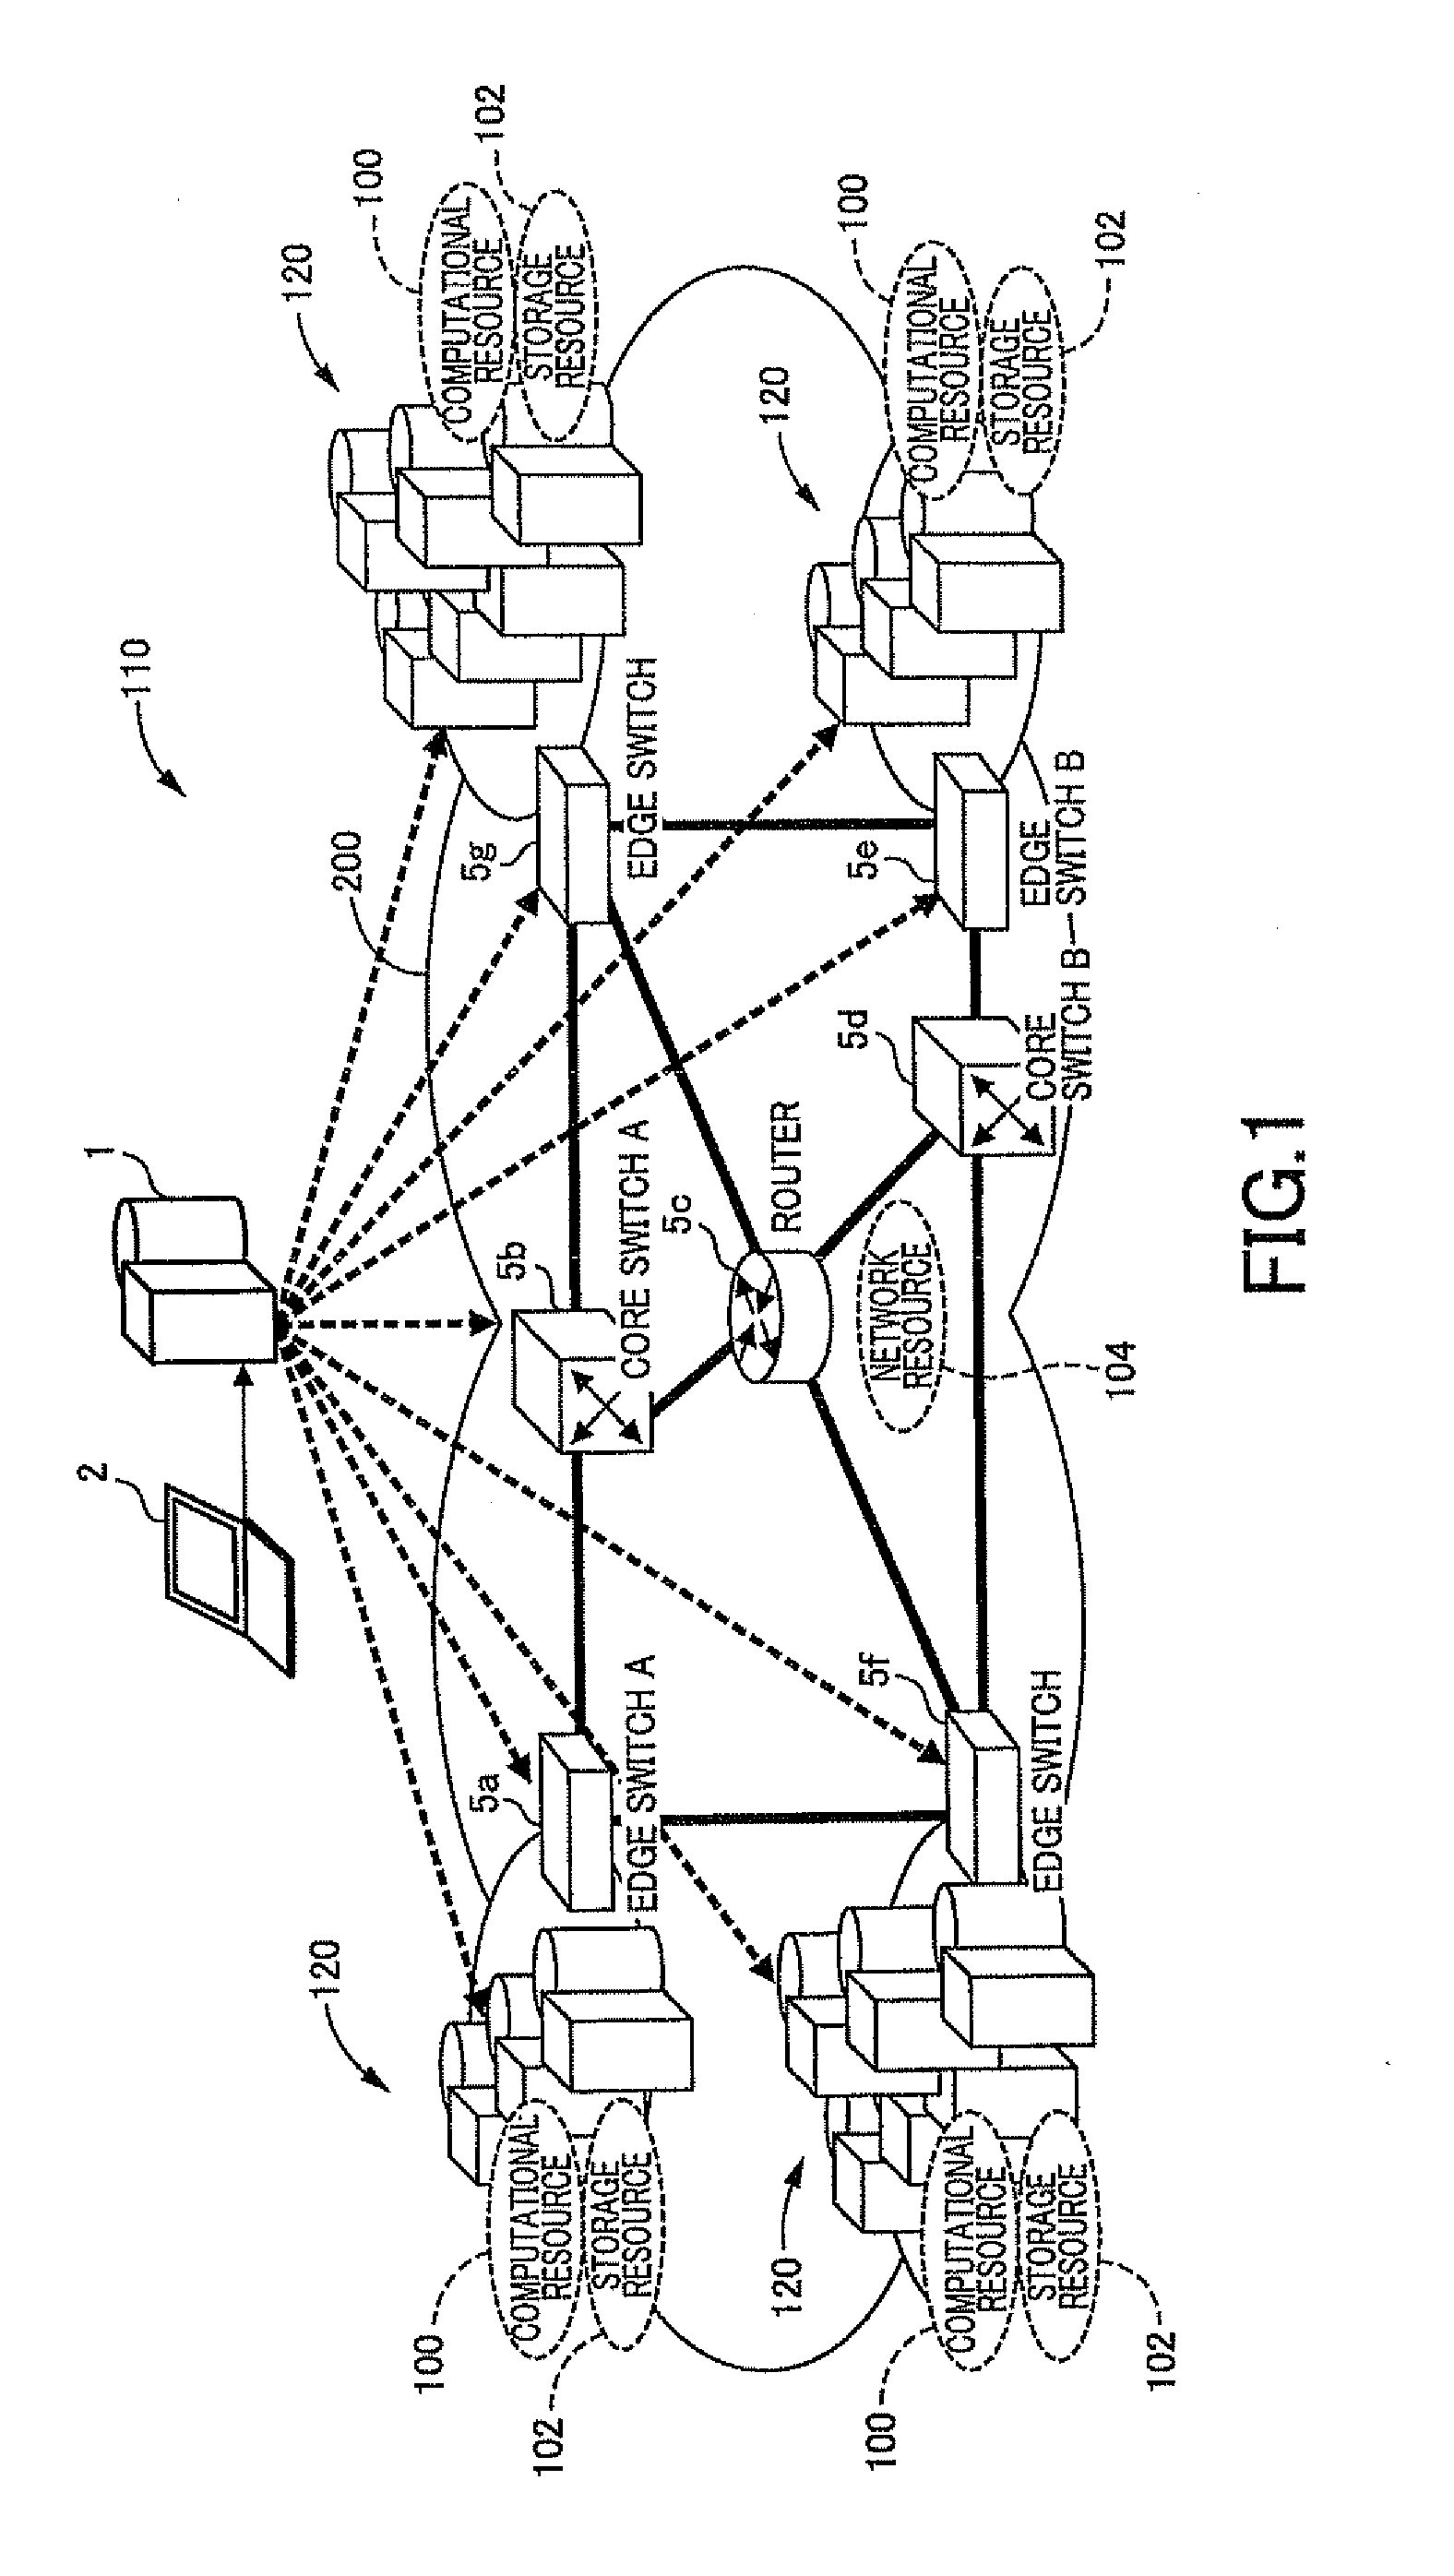 Apparatus and method for controlling devices in requested resource via network